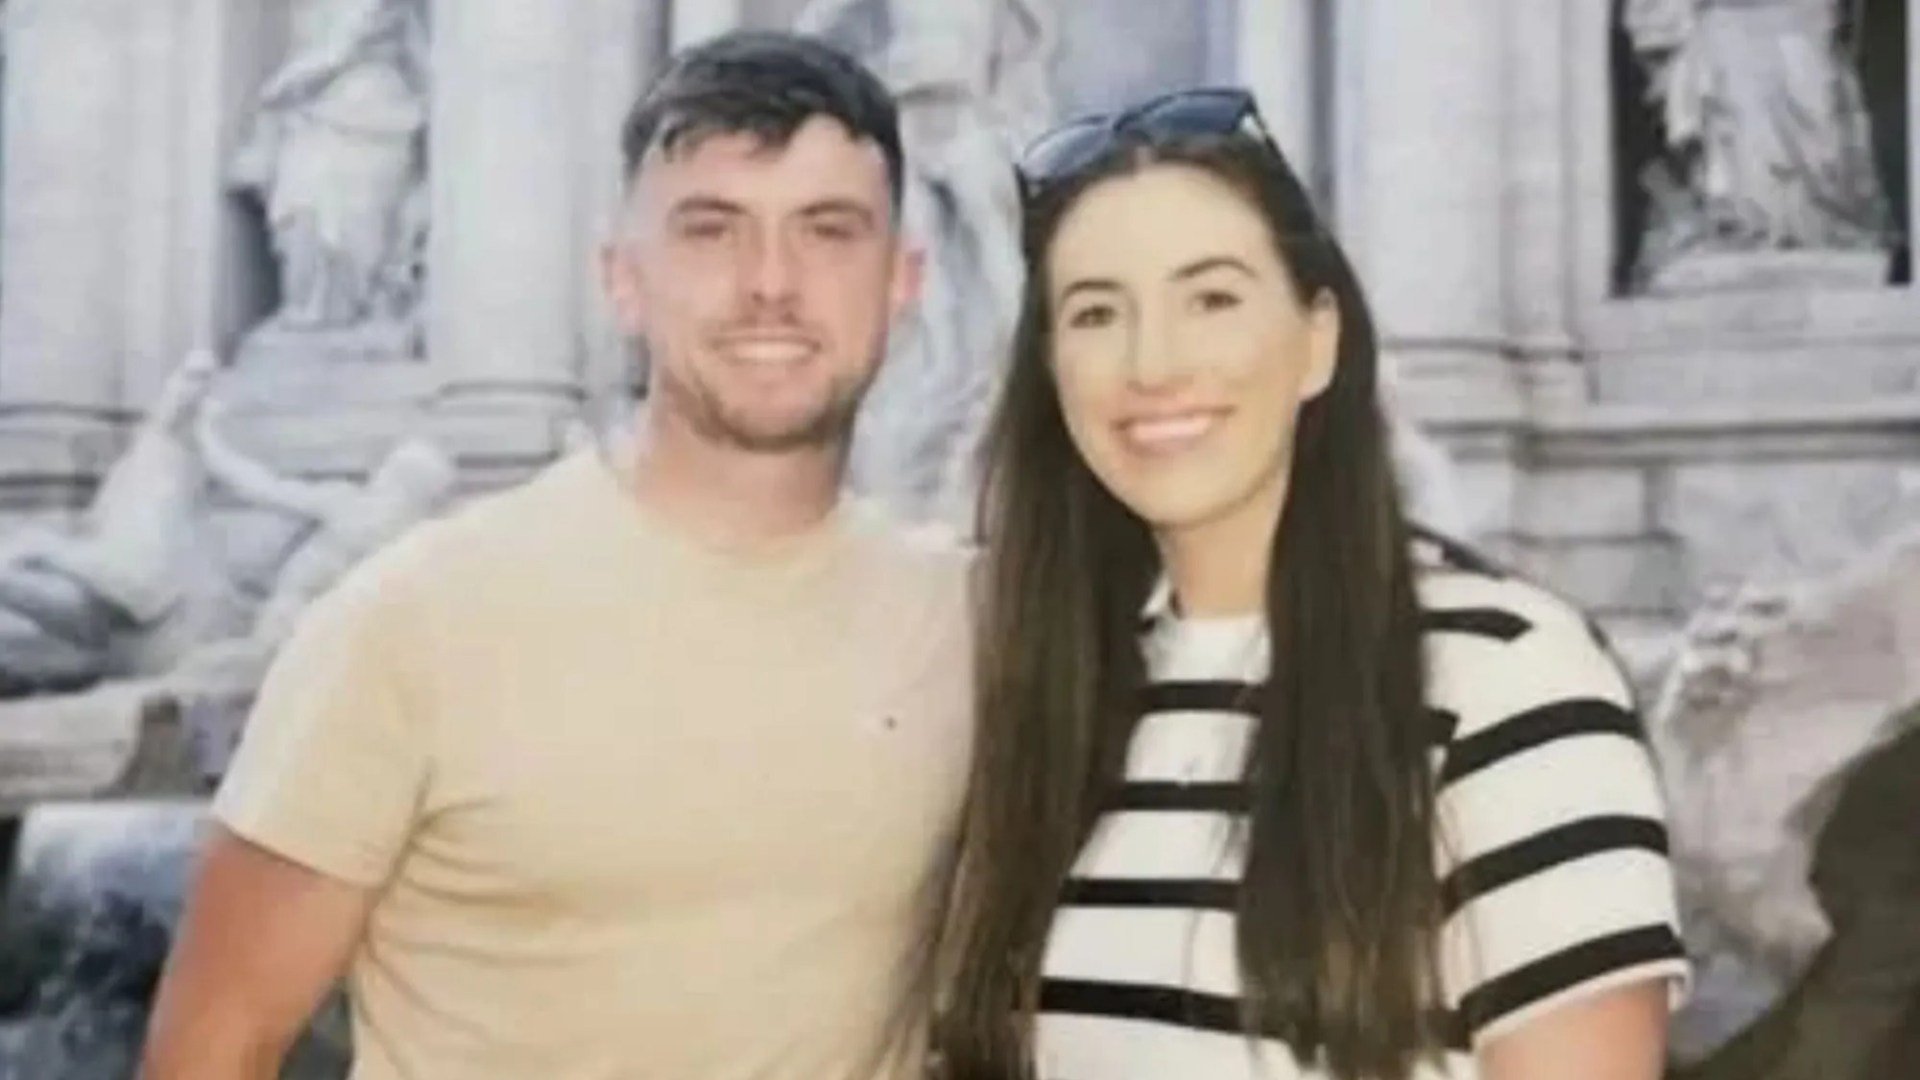 Carlow man who suffered life-changing injuries in Rome accident returns home to Ireland for treatment